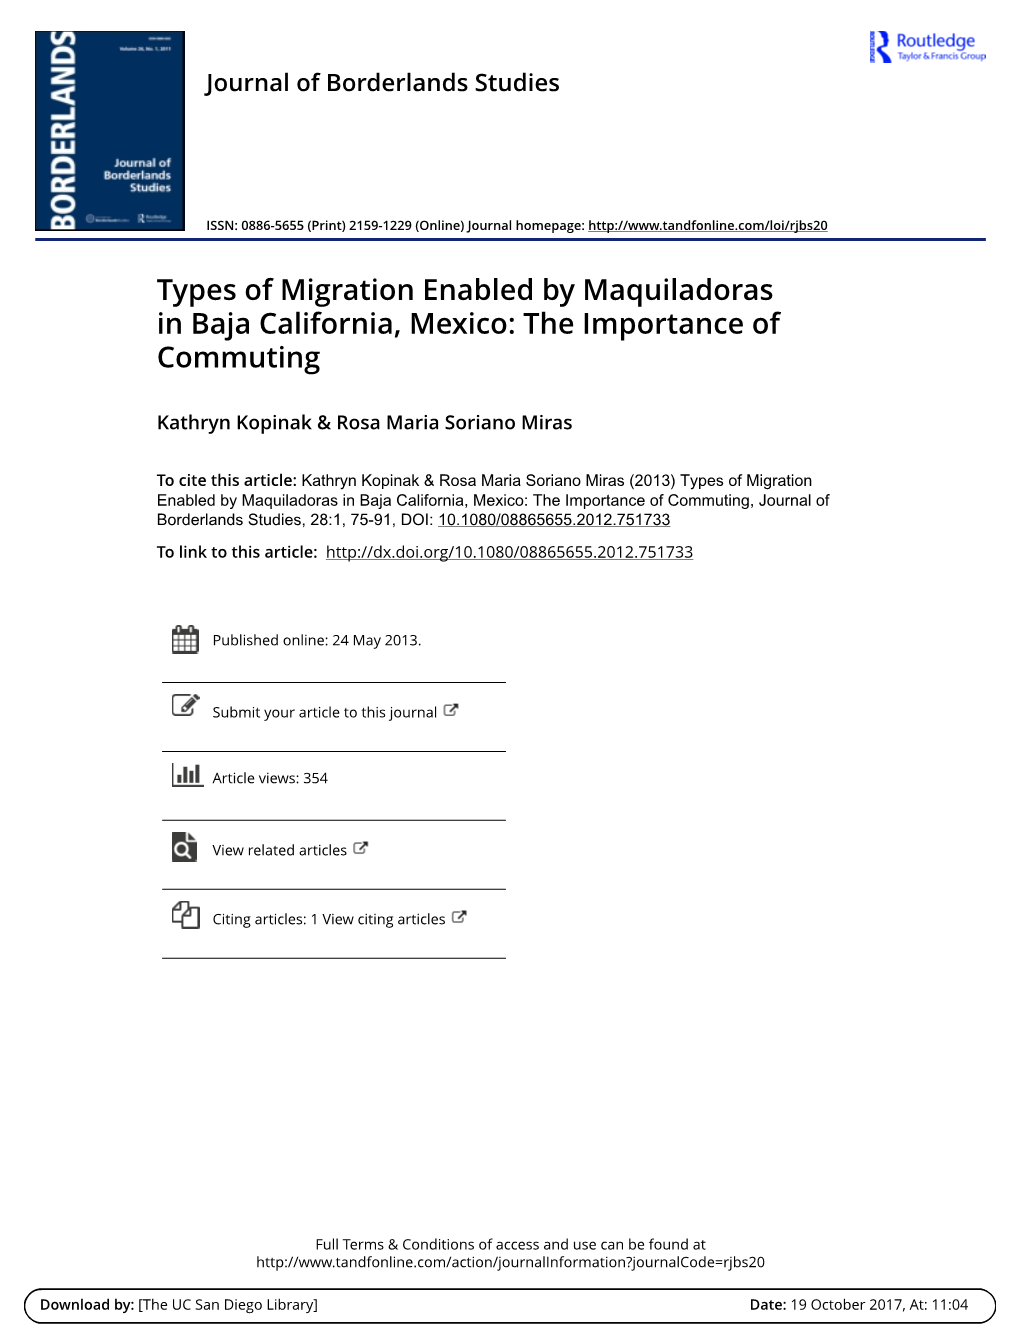 Types of Migration Enabled by Maquiladoras in Baja California, Mexico: the Importance of Commuting